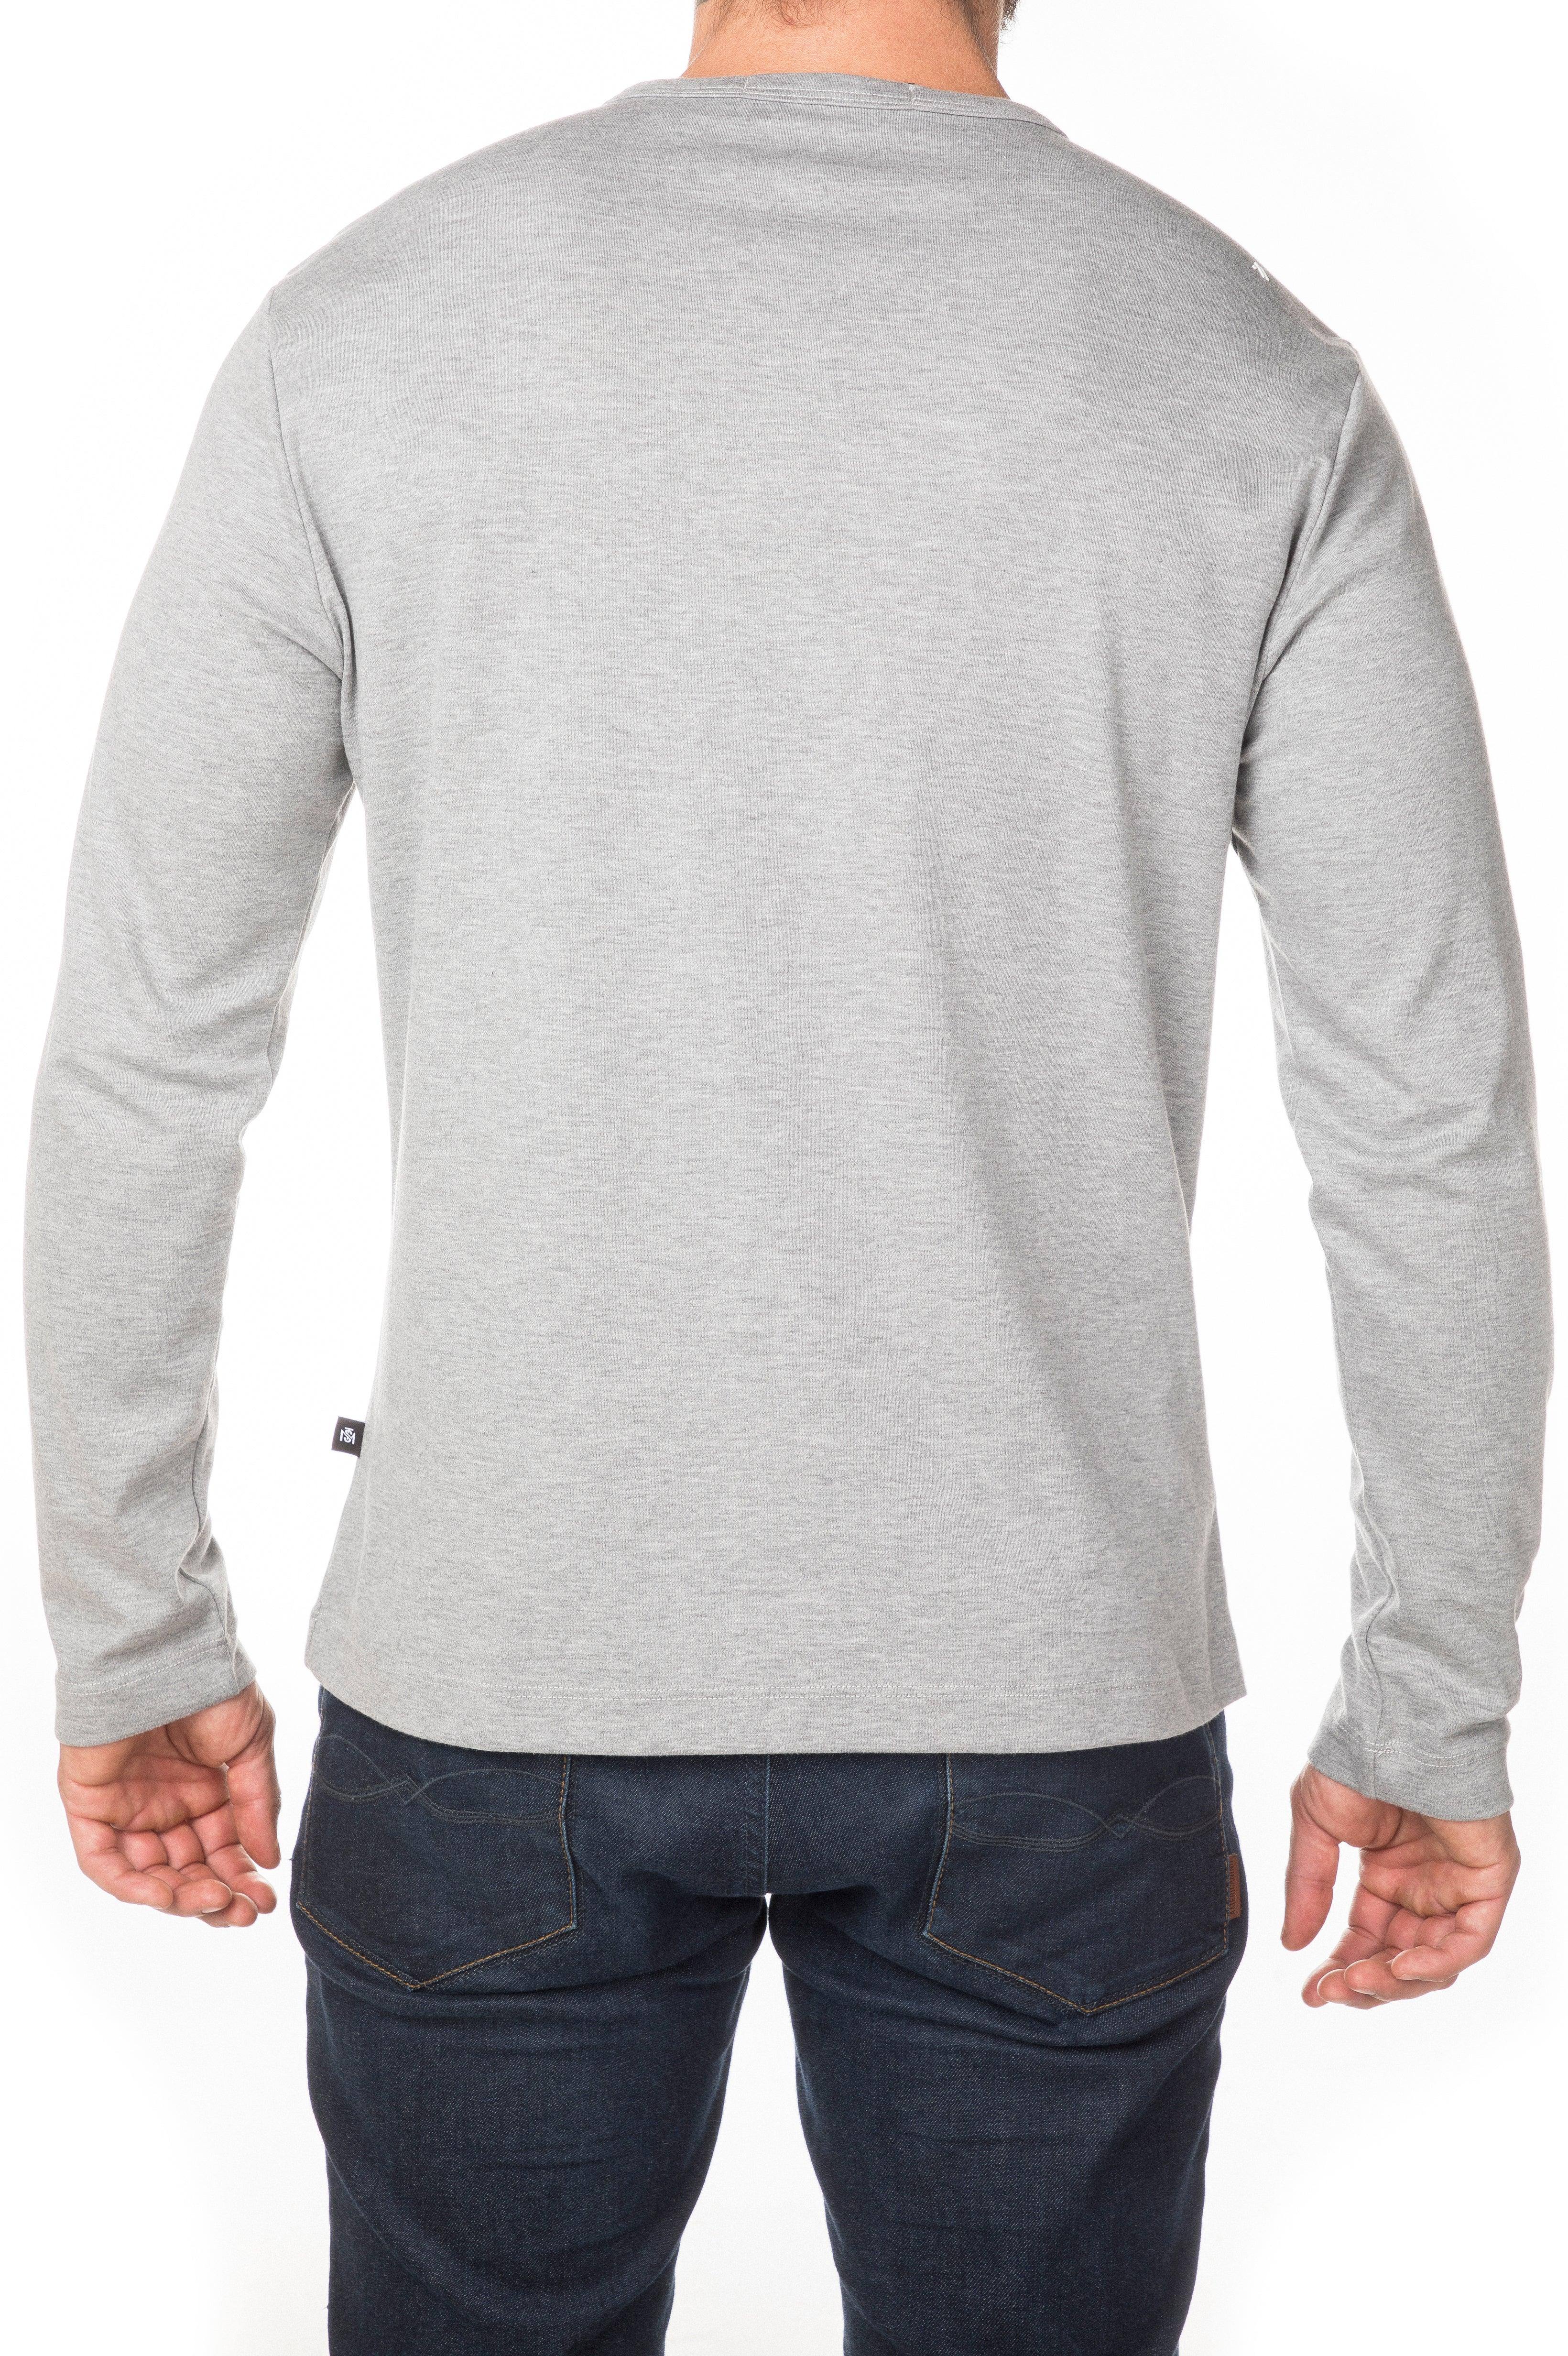 NASSER LONG SLEEVE JASPED GREY | Monastery Couture